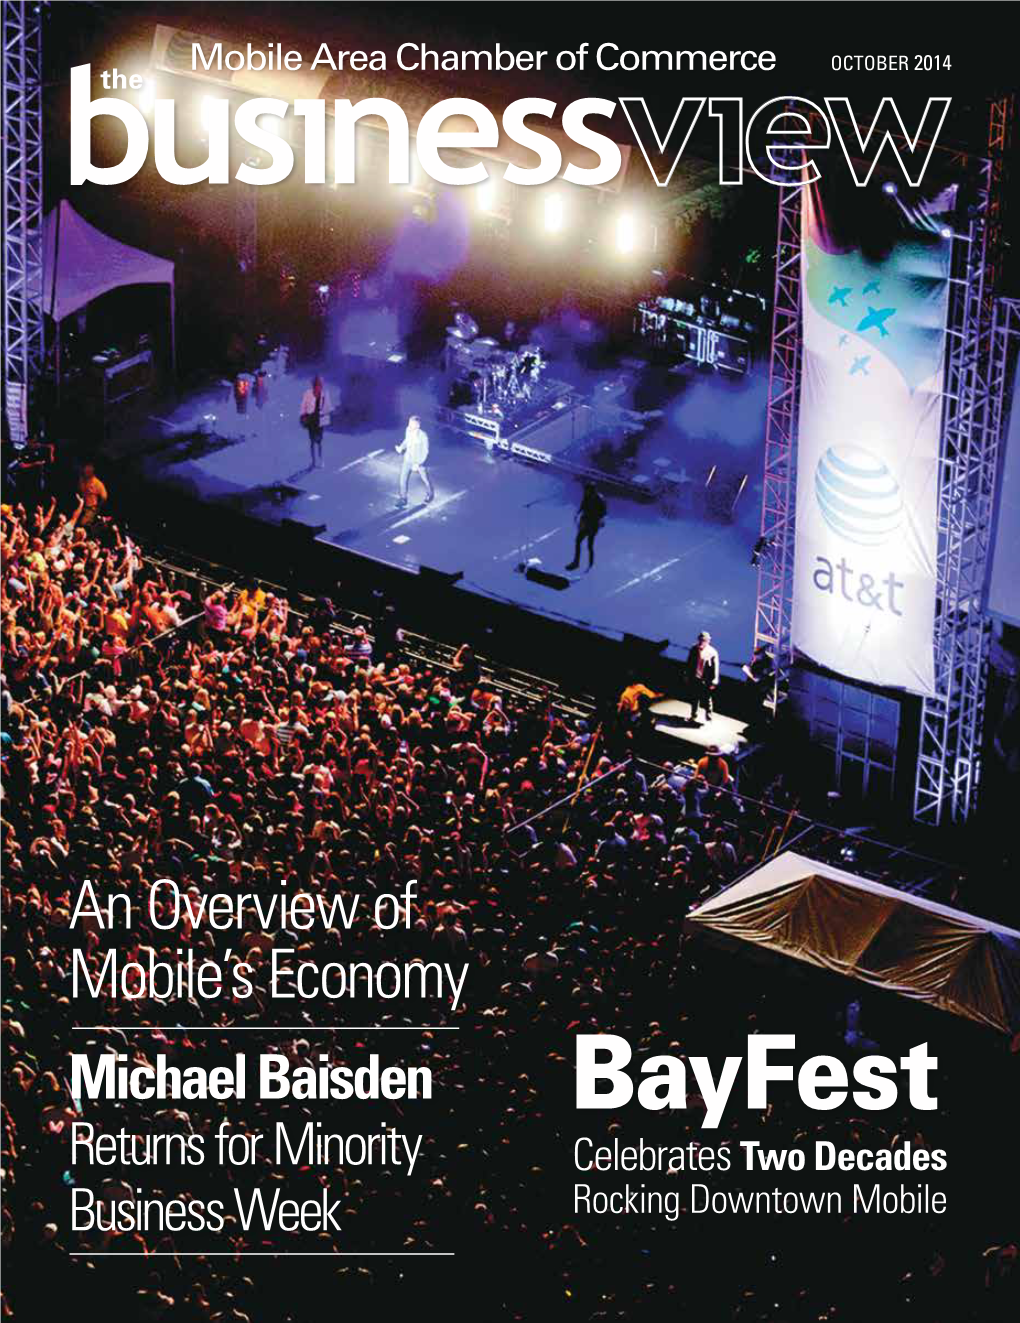 Bayfest Returns for Minority Celebrates Two Decades Business Week Rocking Downtown Mobile ADVANCED TECHNOLOGY IS: Fiber Optic Data That Doesn’T Slow You Down